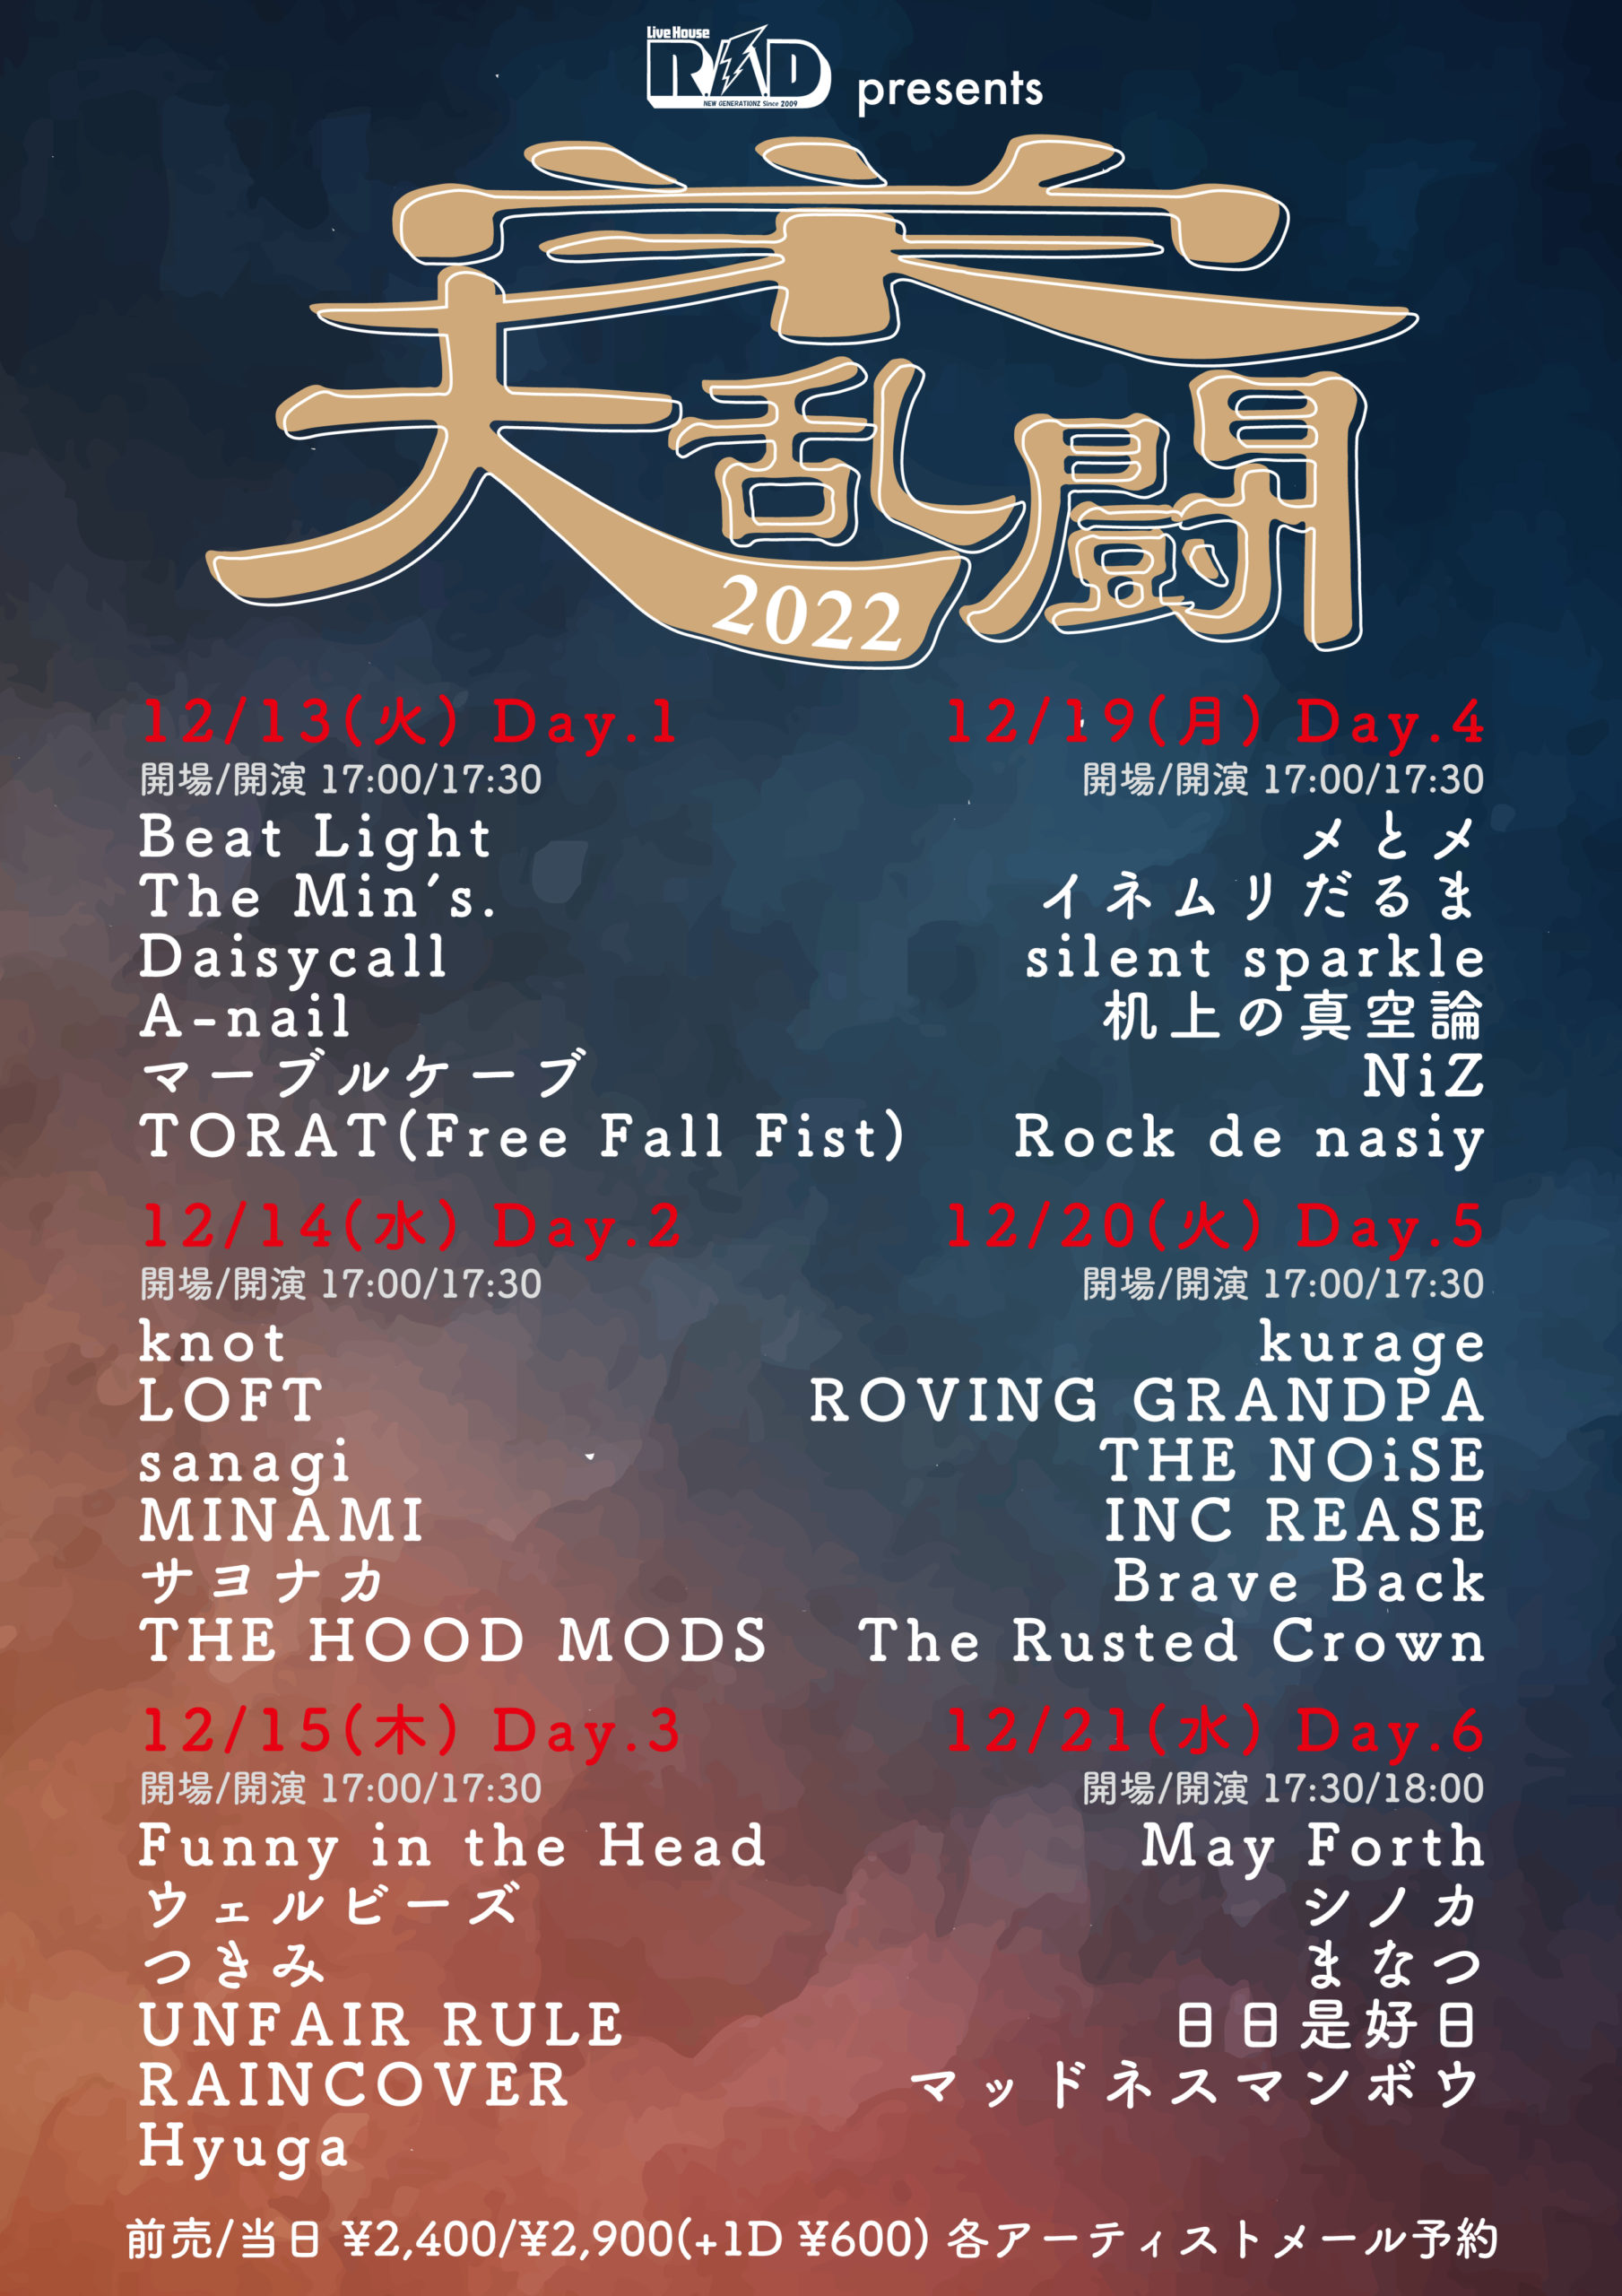 R.A.D presents 栄大乱闘2022 Day.6